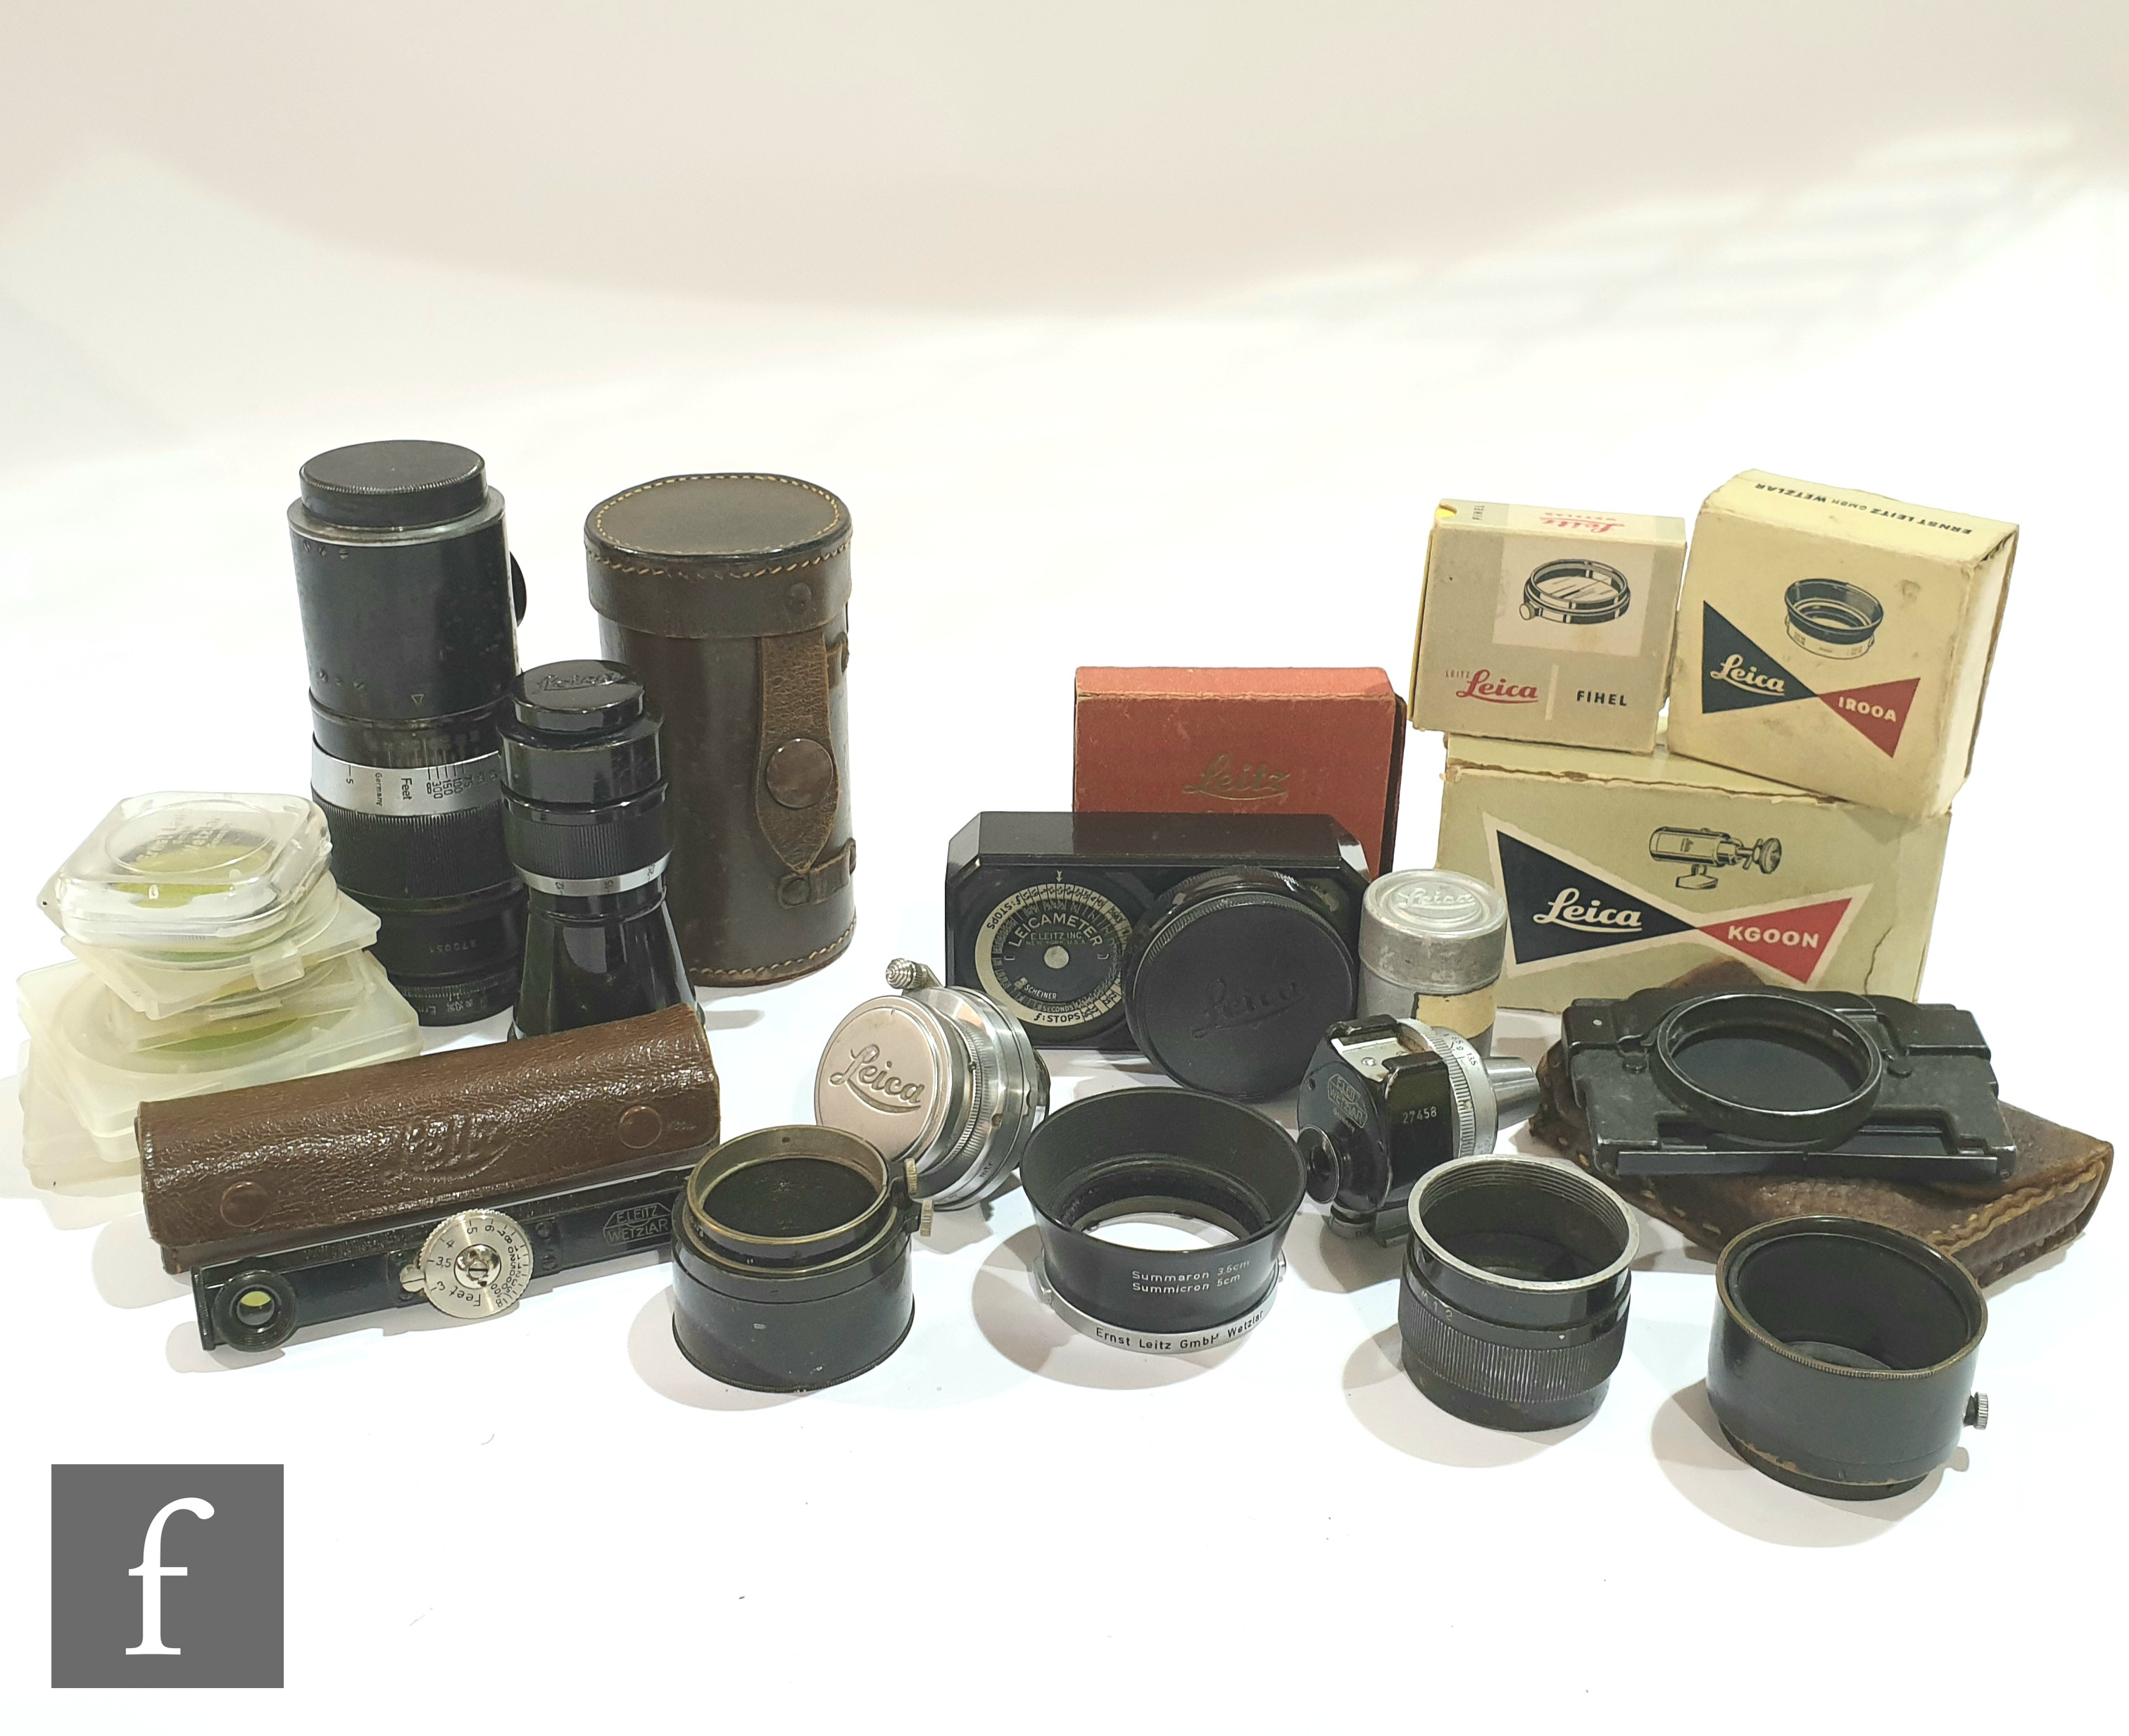 A collection of Leica Ernst Leitz Wetzlar lenses and accessories, to include a Hektor f= 13.5 cm 1: